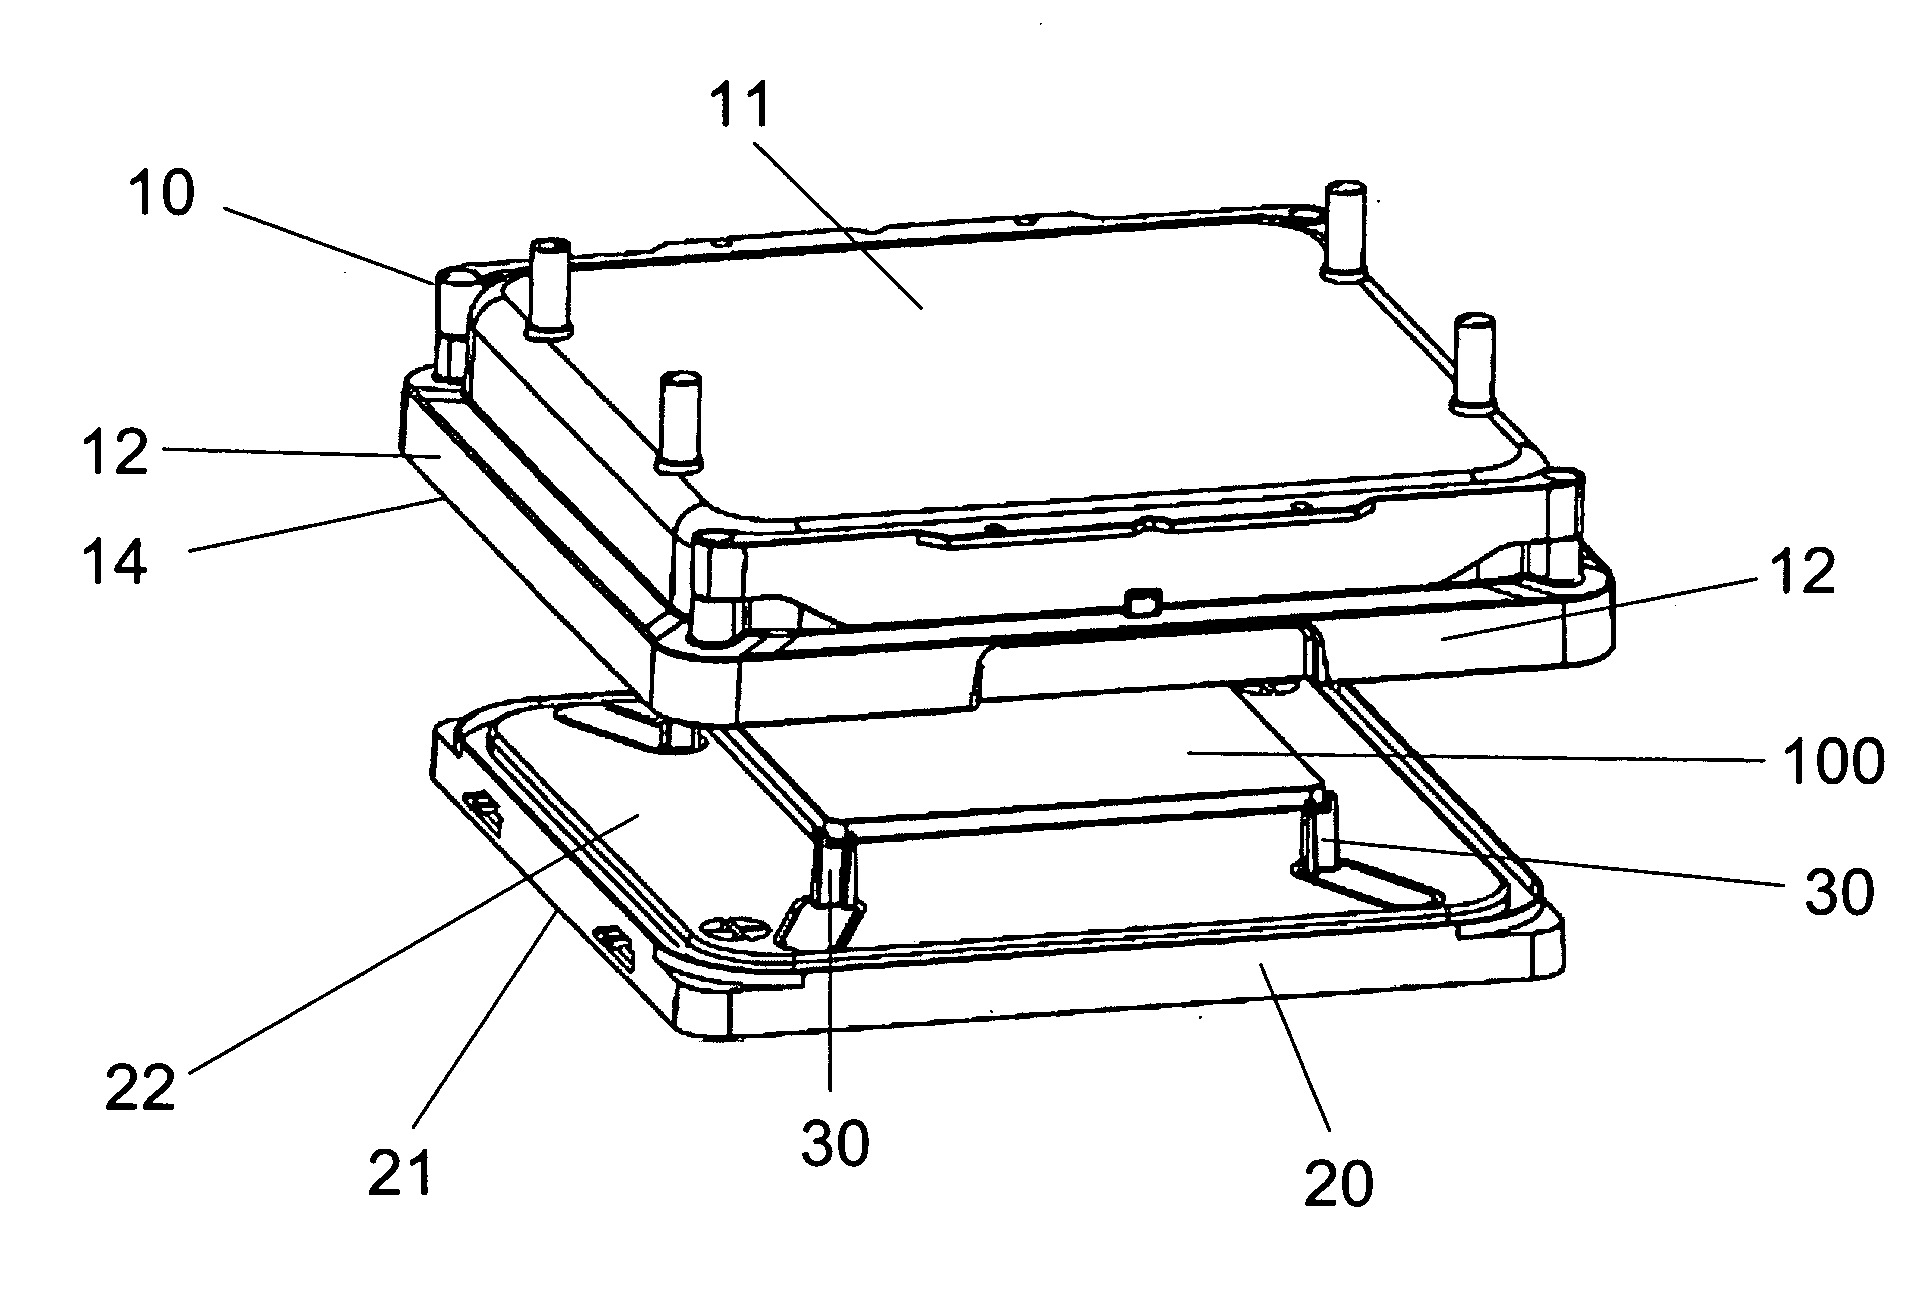 Thin-plate container